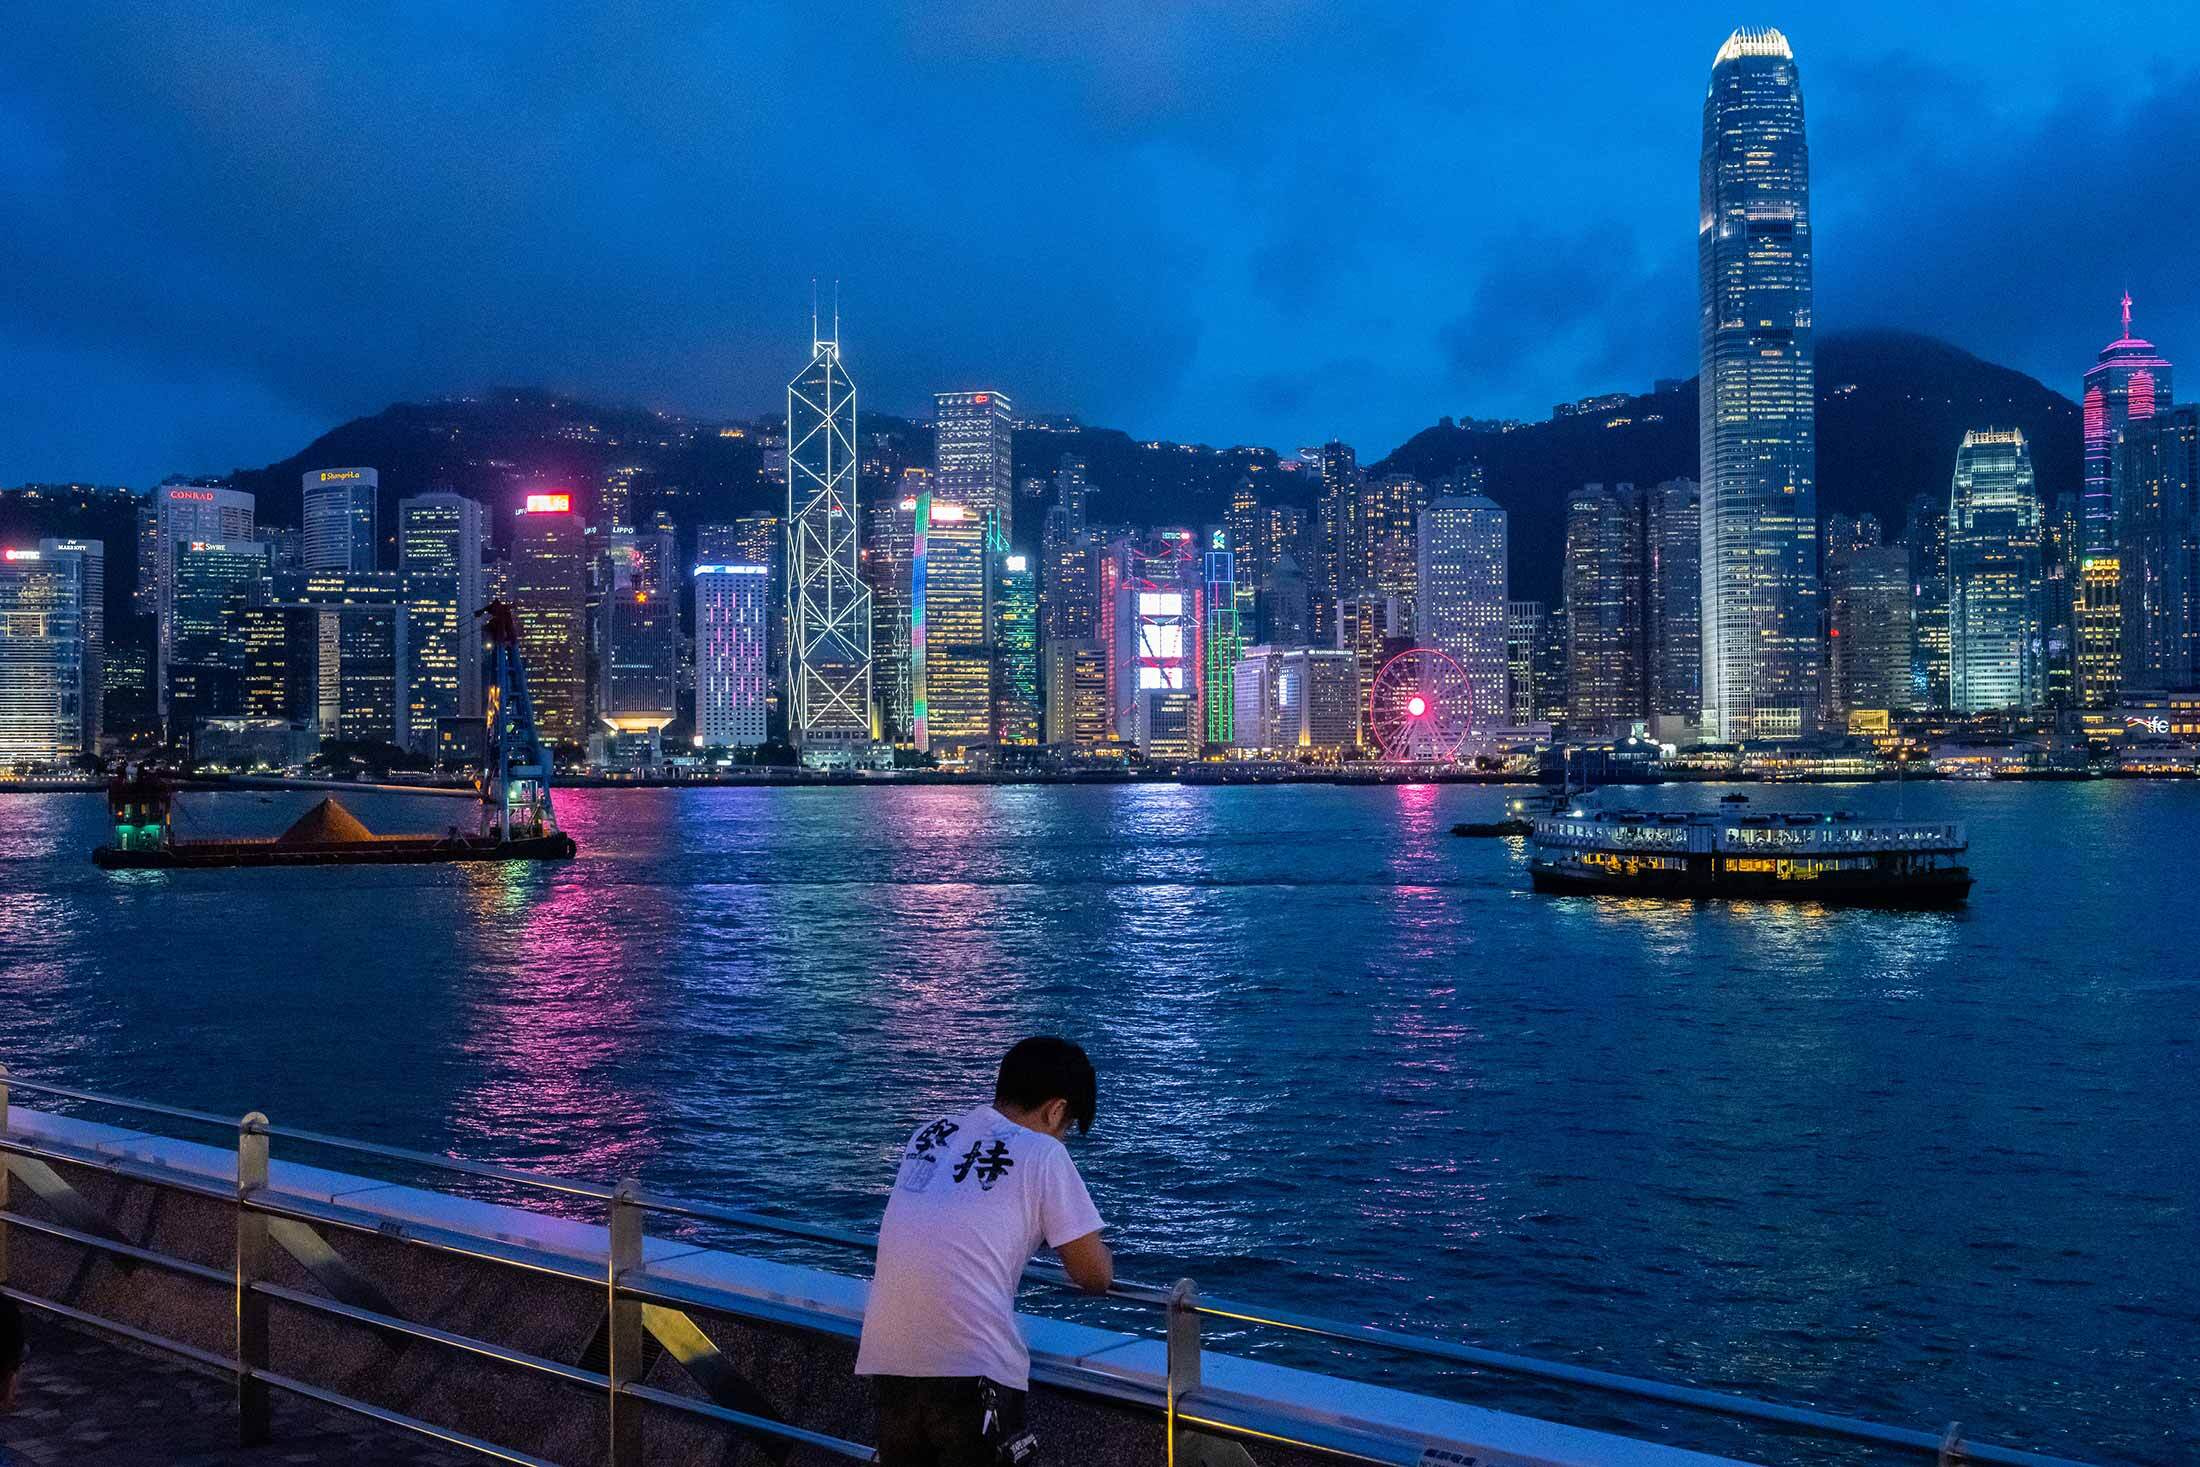 Hong Kong Is Losing Its Fight to Repair Image as Shopping Heaven - Bloomberg